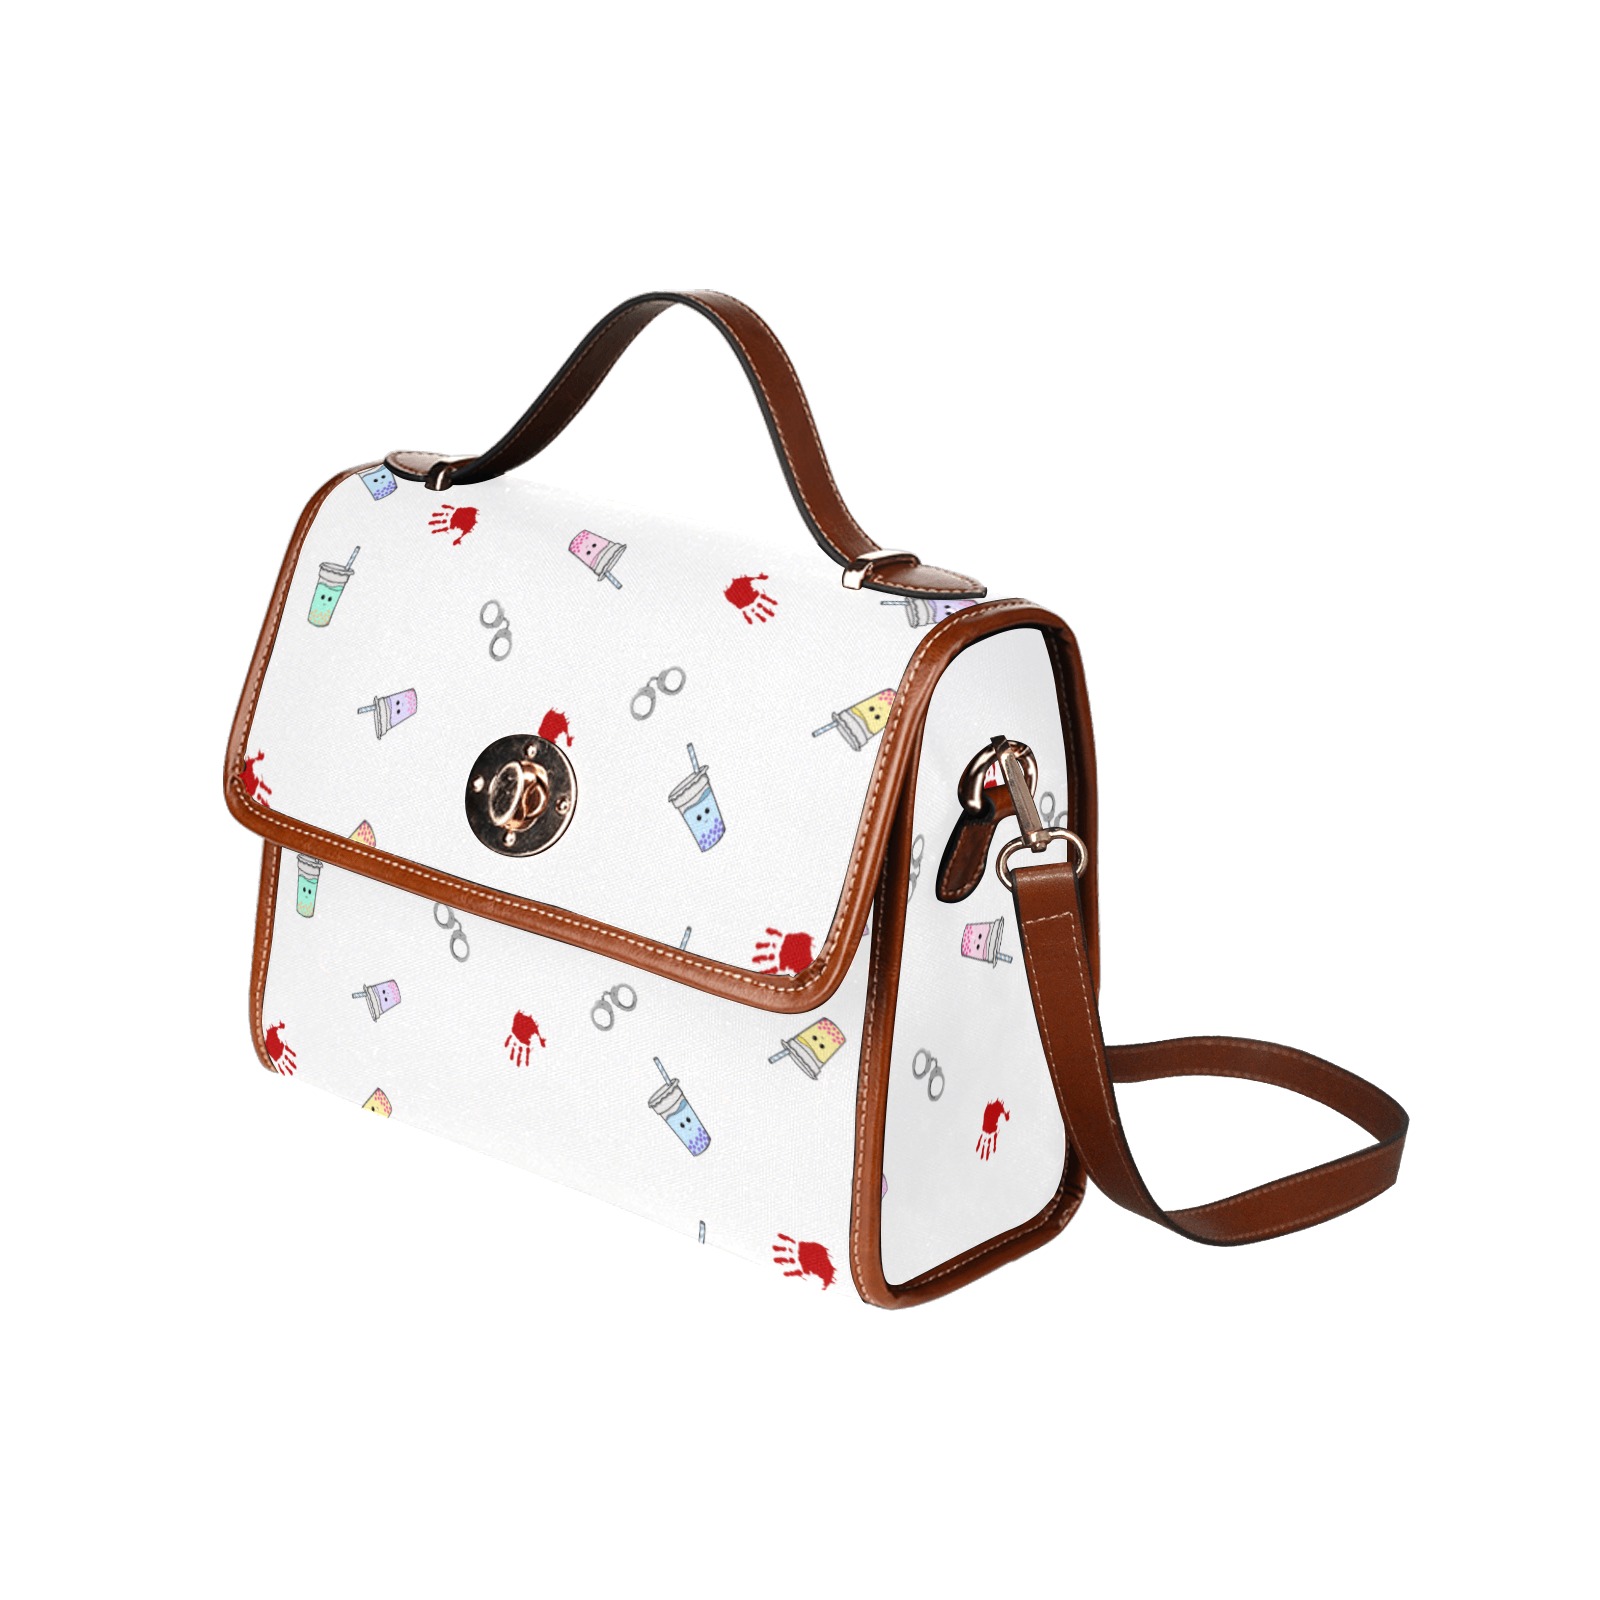 True Crime & Boba Time Purse W/ Brown straps Waterproof Canvas Bag-Brown (All Over Print) (Model 1641)